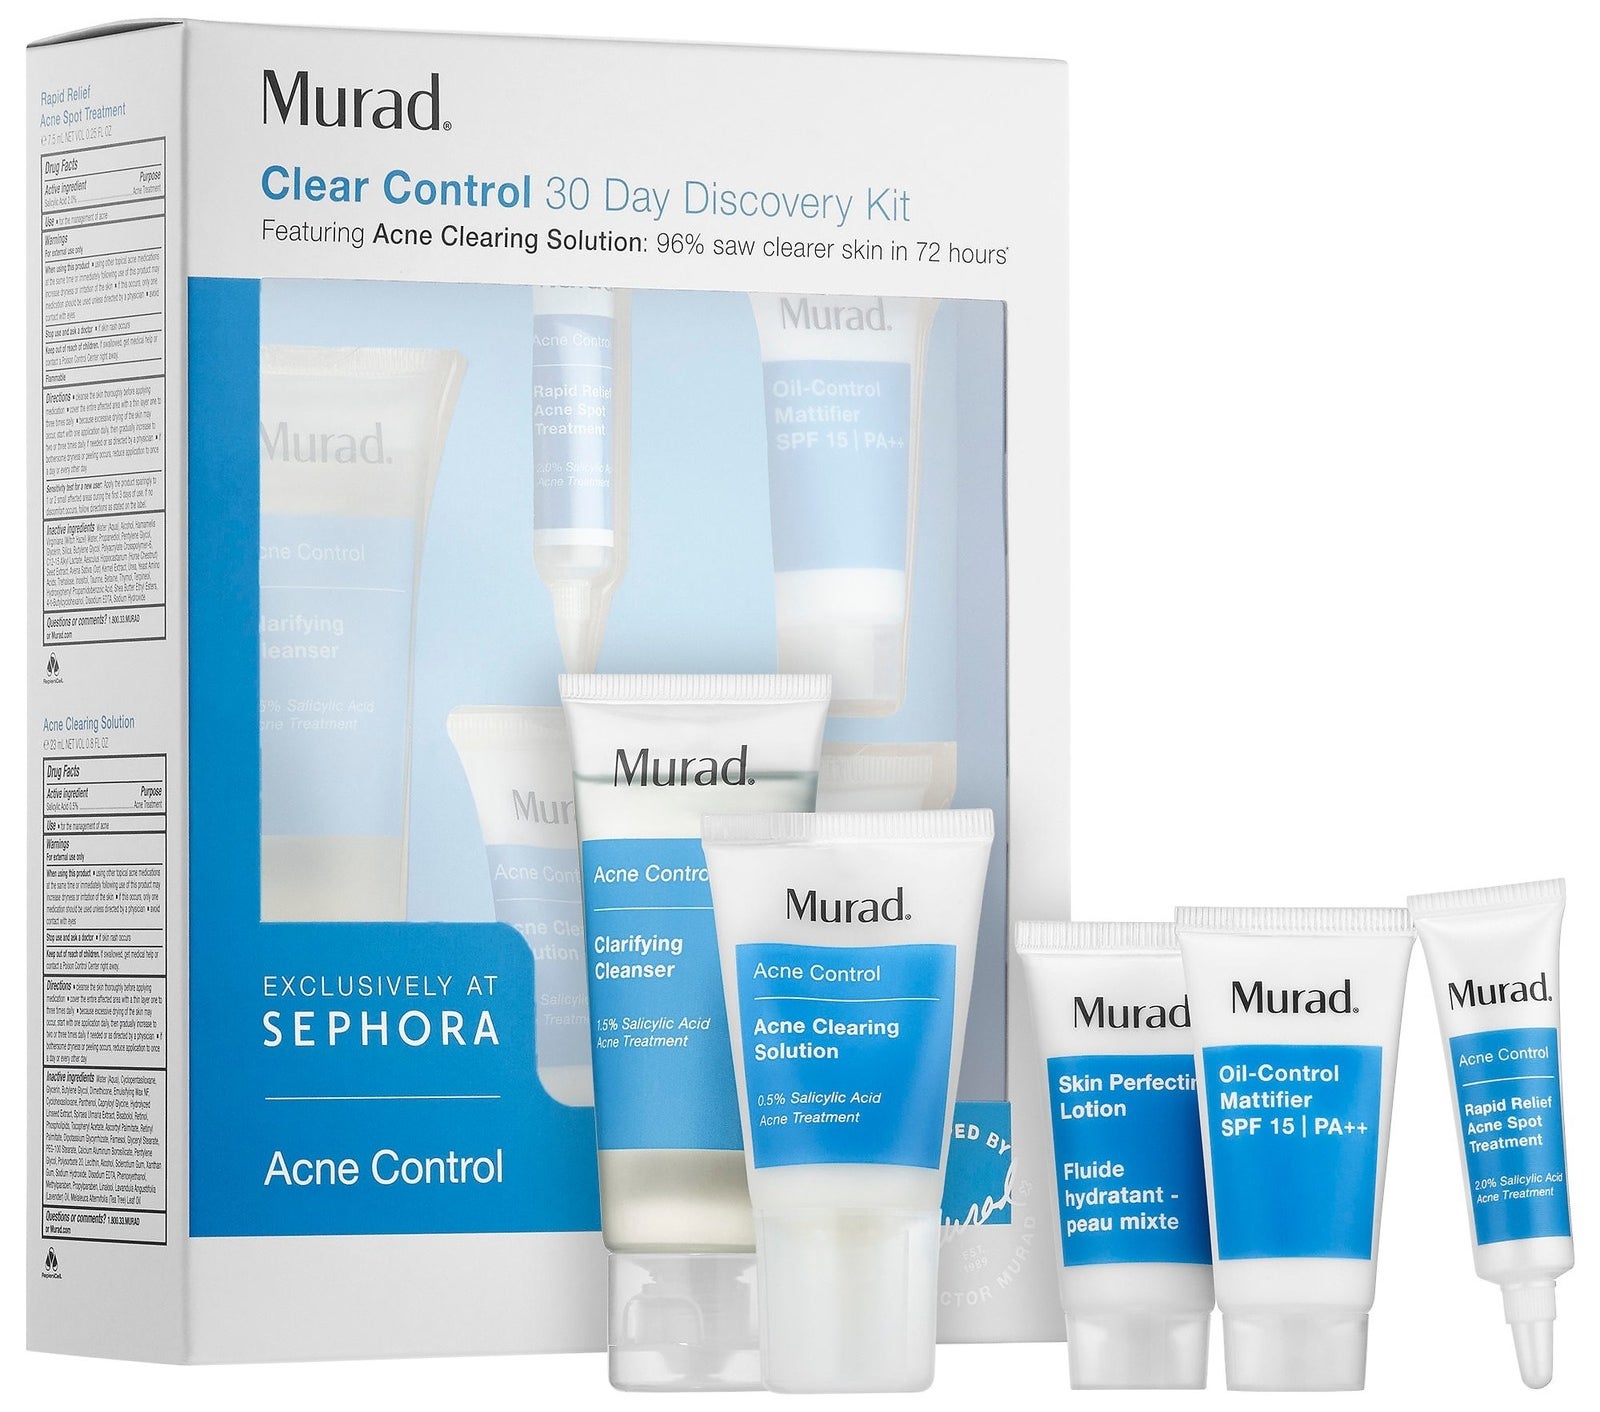 Clearing solution. Acne Discovery Kit. Аналог Murad Anti acne. Oil Control acne. Acne Control Oil and Pore Control Mattifier broad Spectrum SPF 45 | pa++++ Murad.